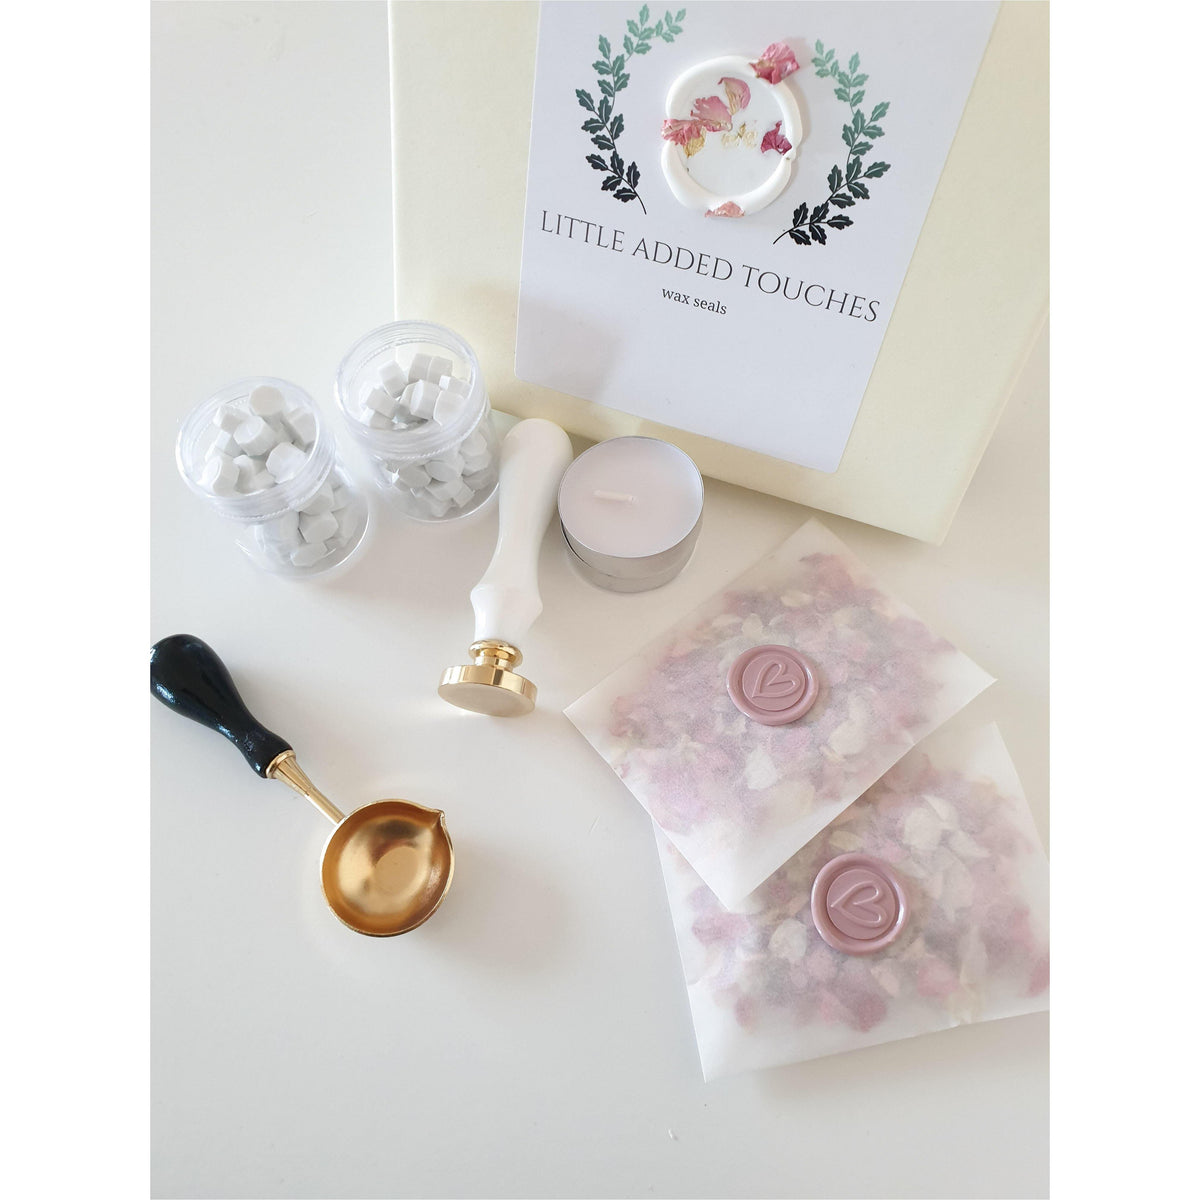 Pre Made Wax Seals – Little Added Touches